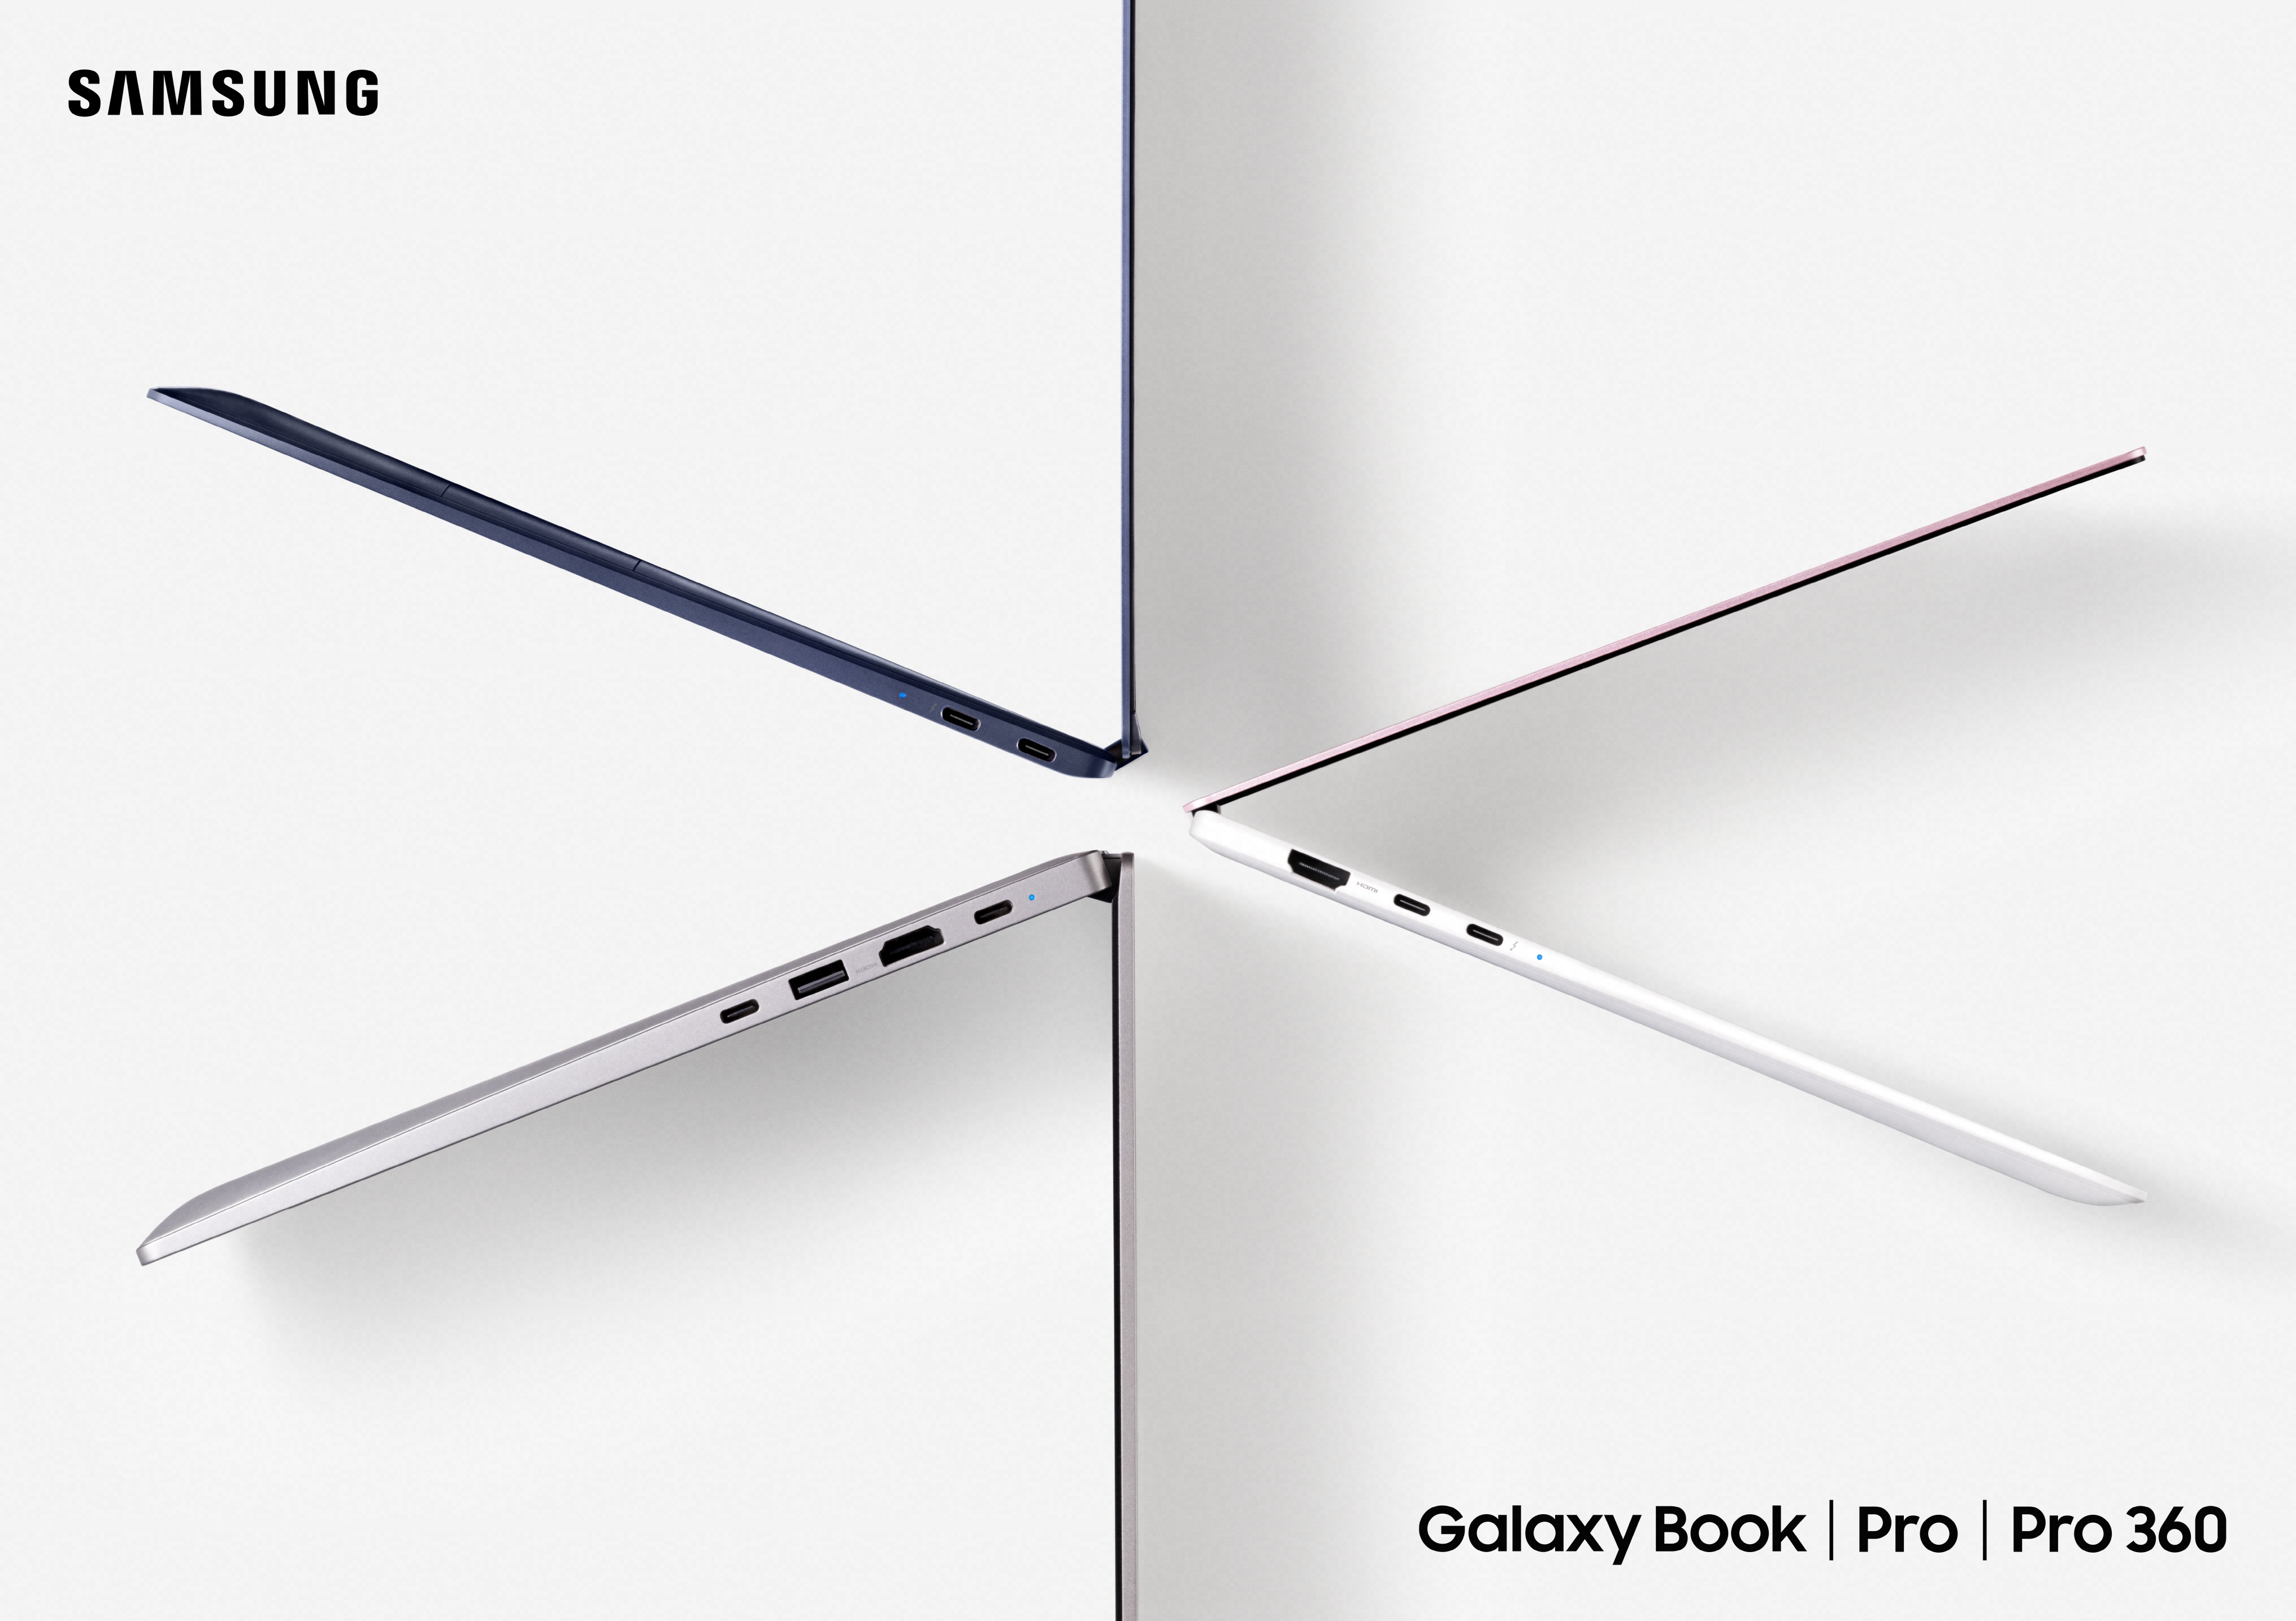 The new Samsung Galaxy Book, Galaxy Book Pro and Pro 360